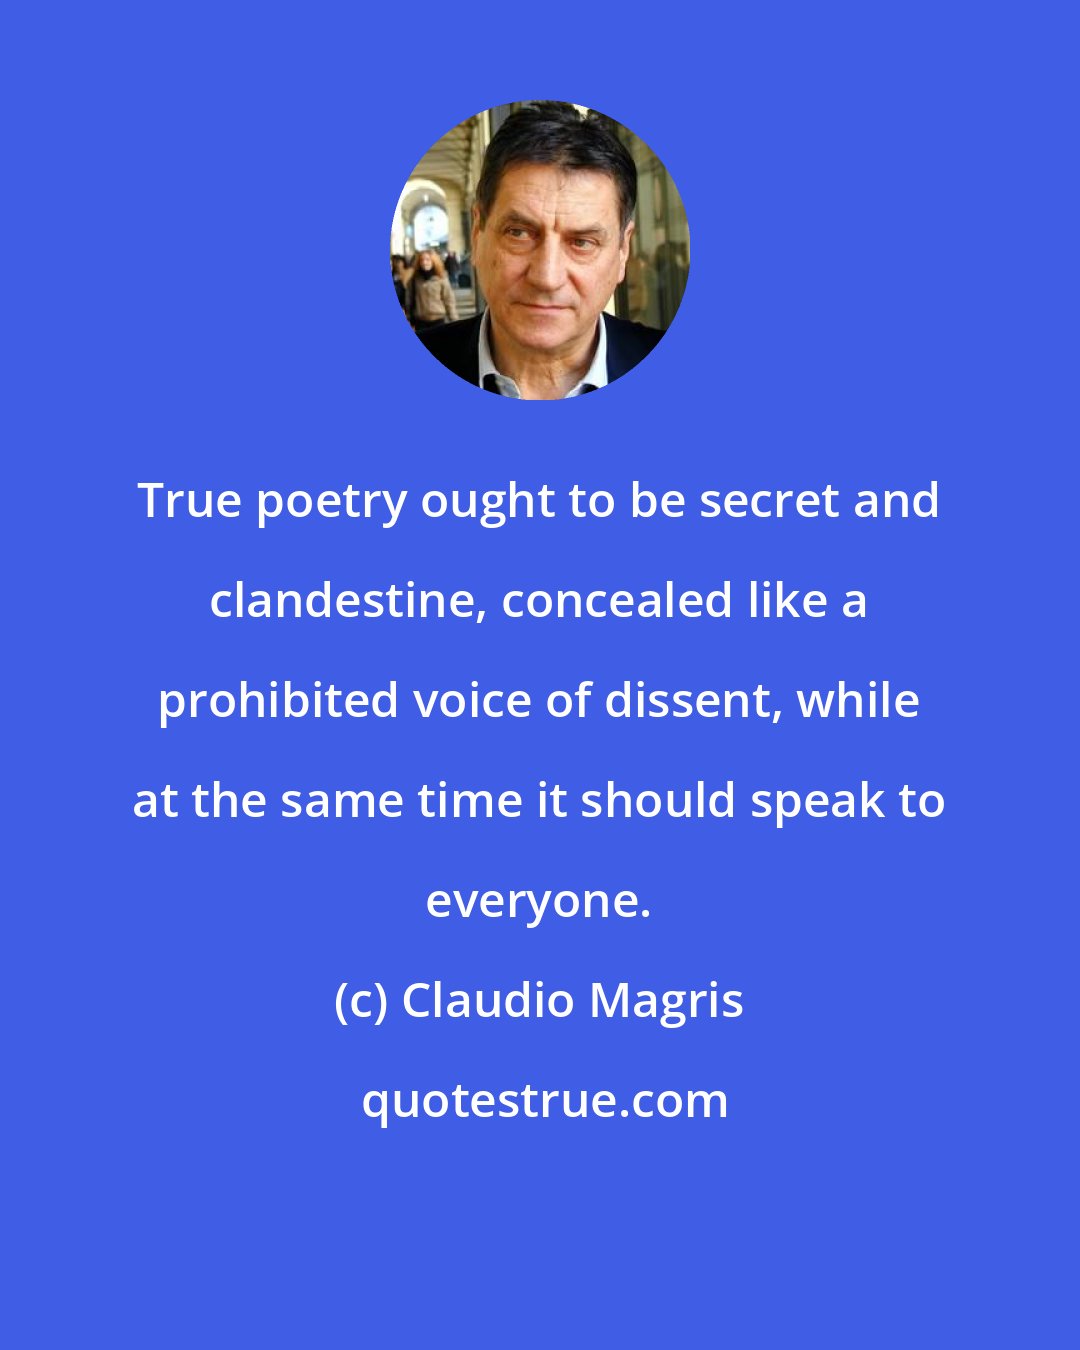 Claudio Magris: True poetry ought to be secret and clandestine, concealed like a prohibited voice of dissent, while at the same time it should speak to everyone.